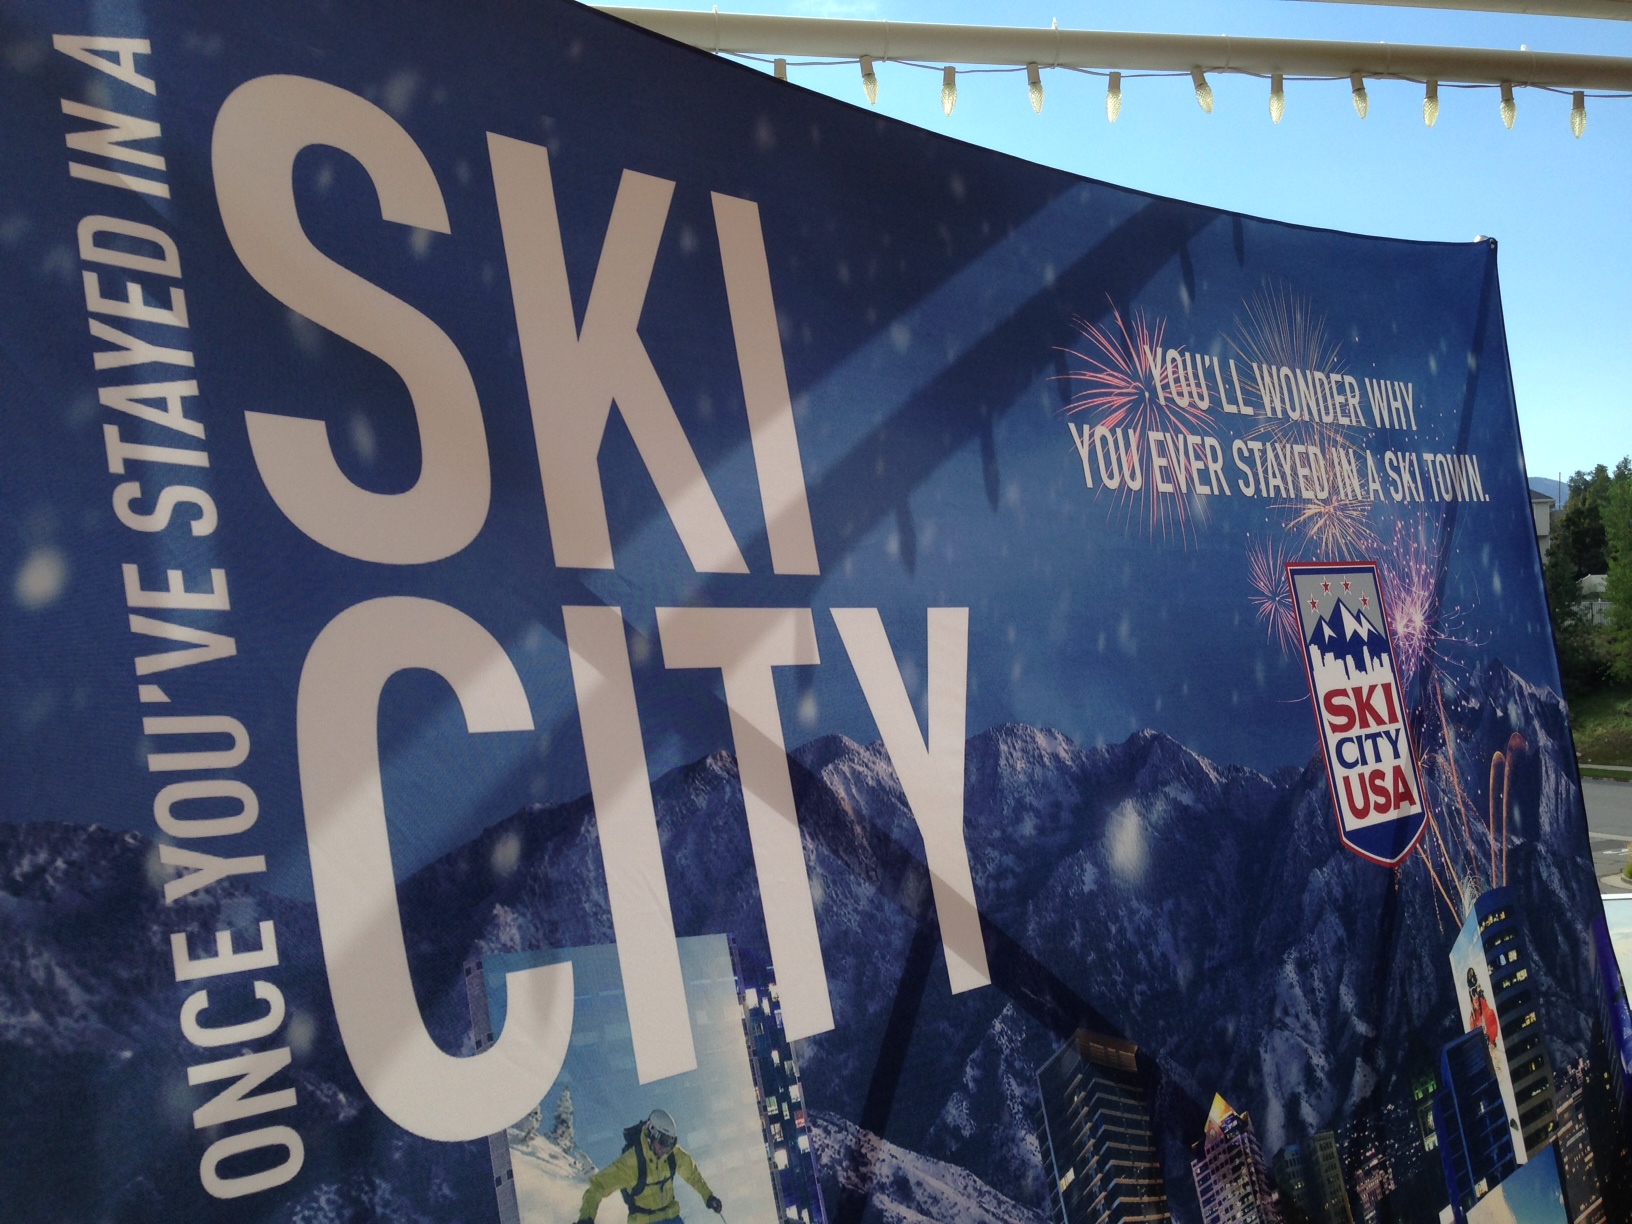 A promotional banner at the "Ski City USA" launch on September 16, 2014.